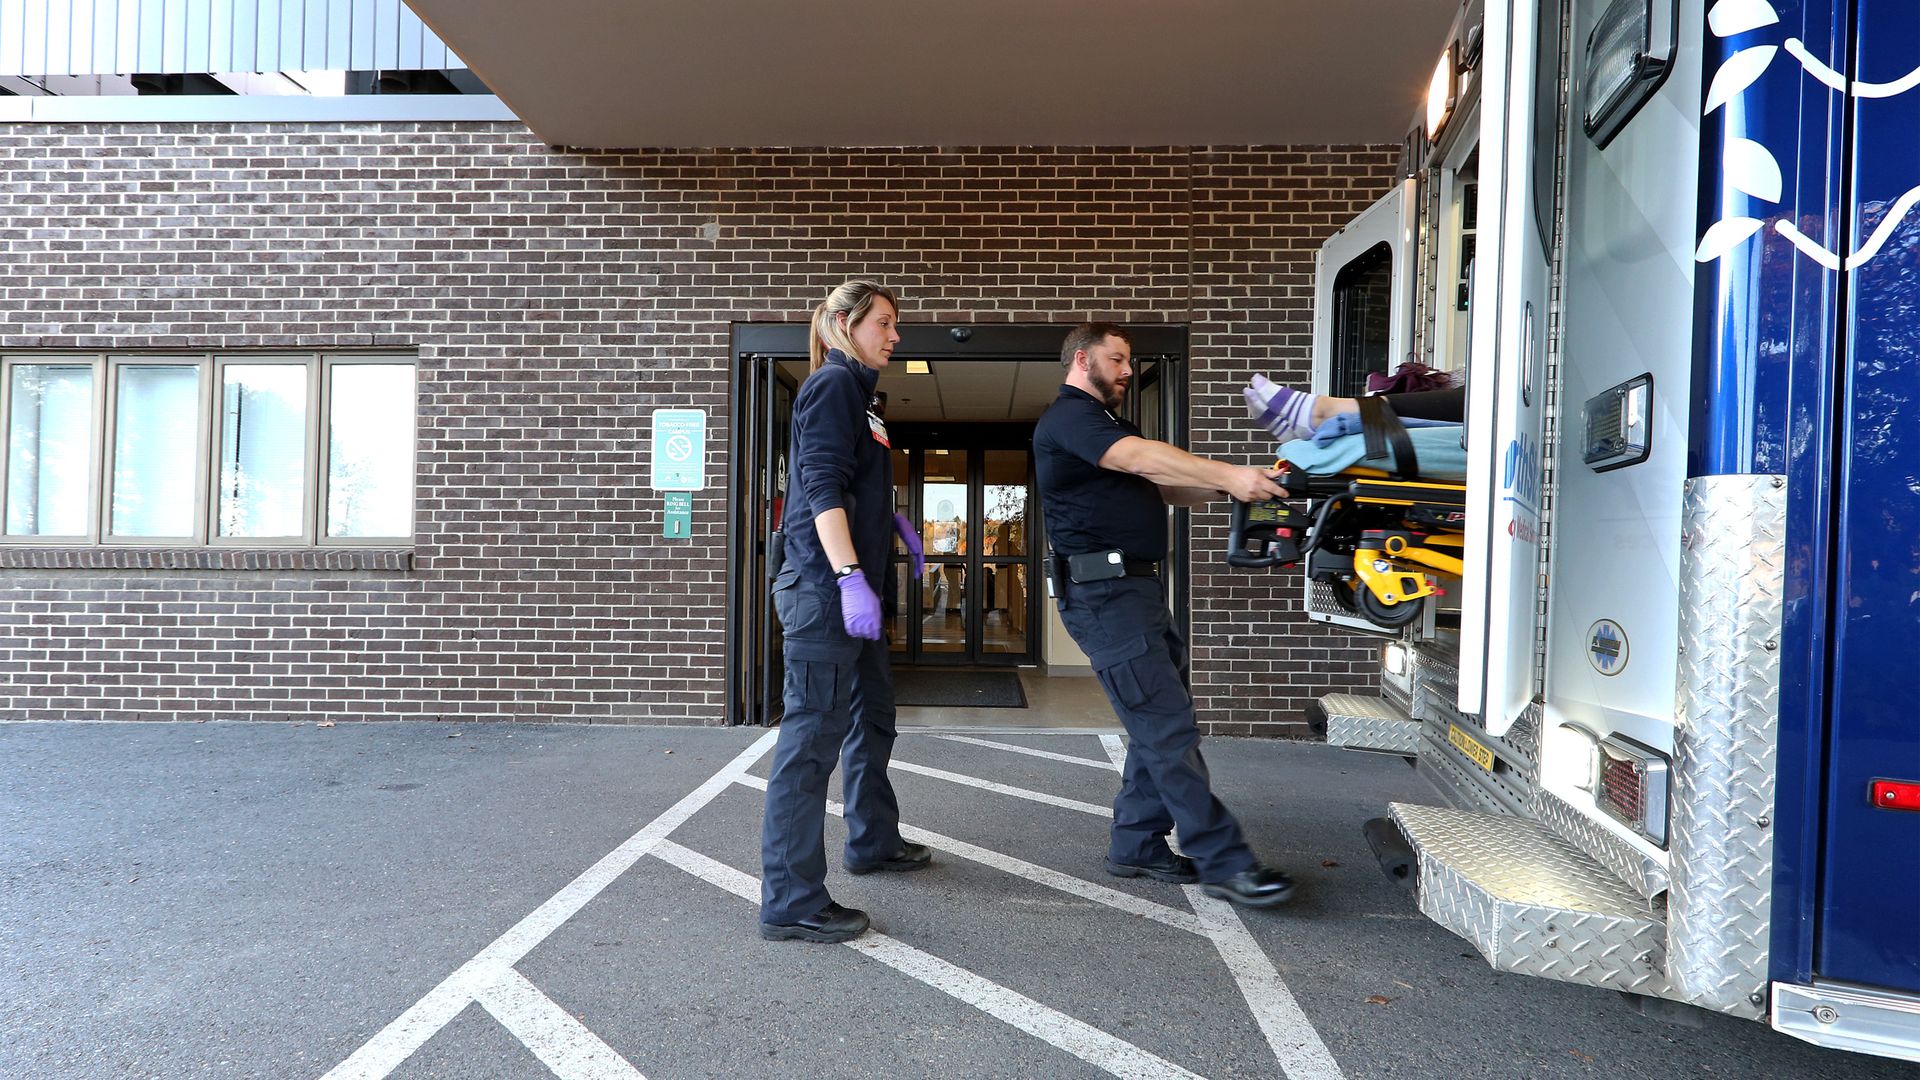 Two EMTs pull a patient out of an ambulance outside of a hospital.